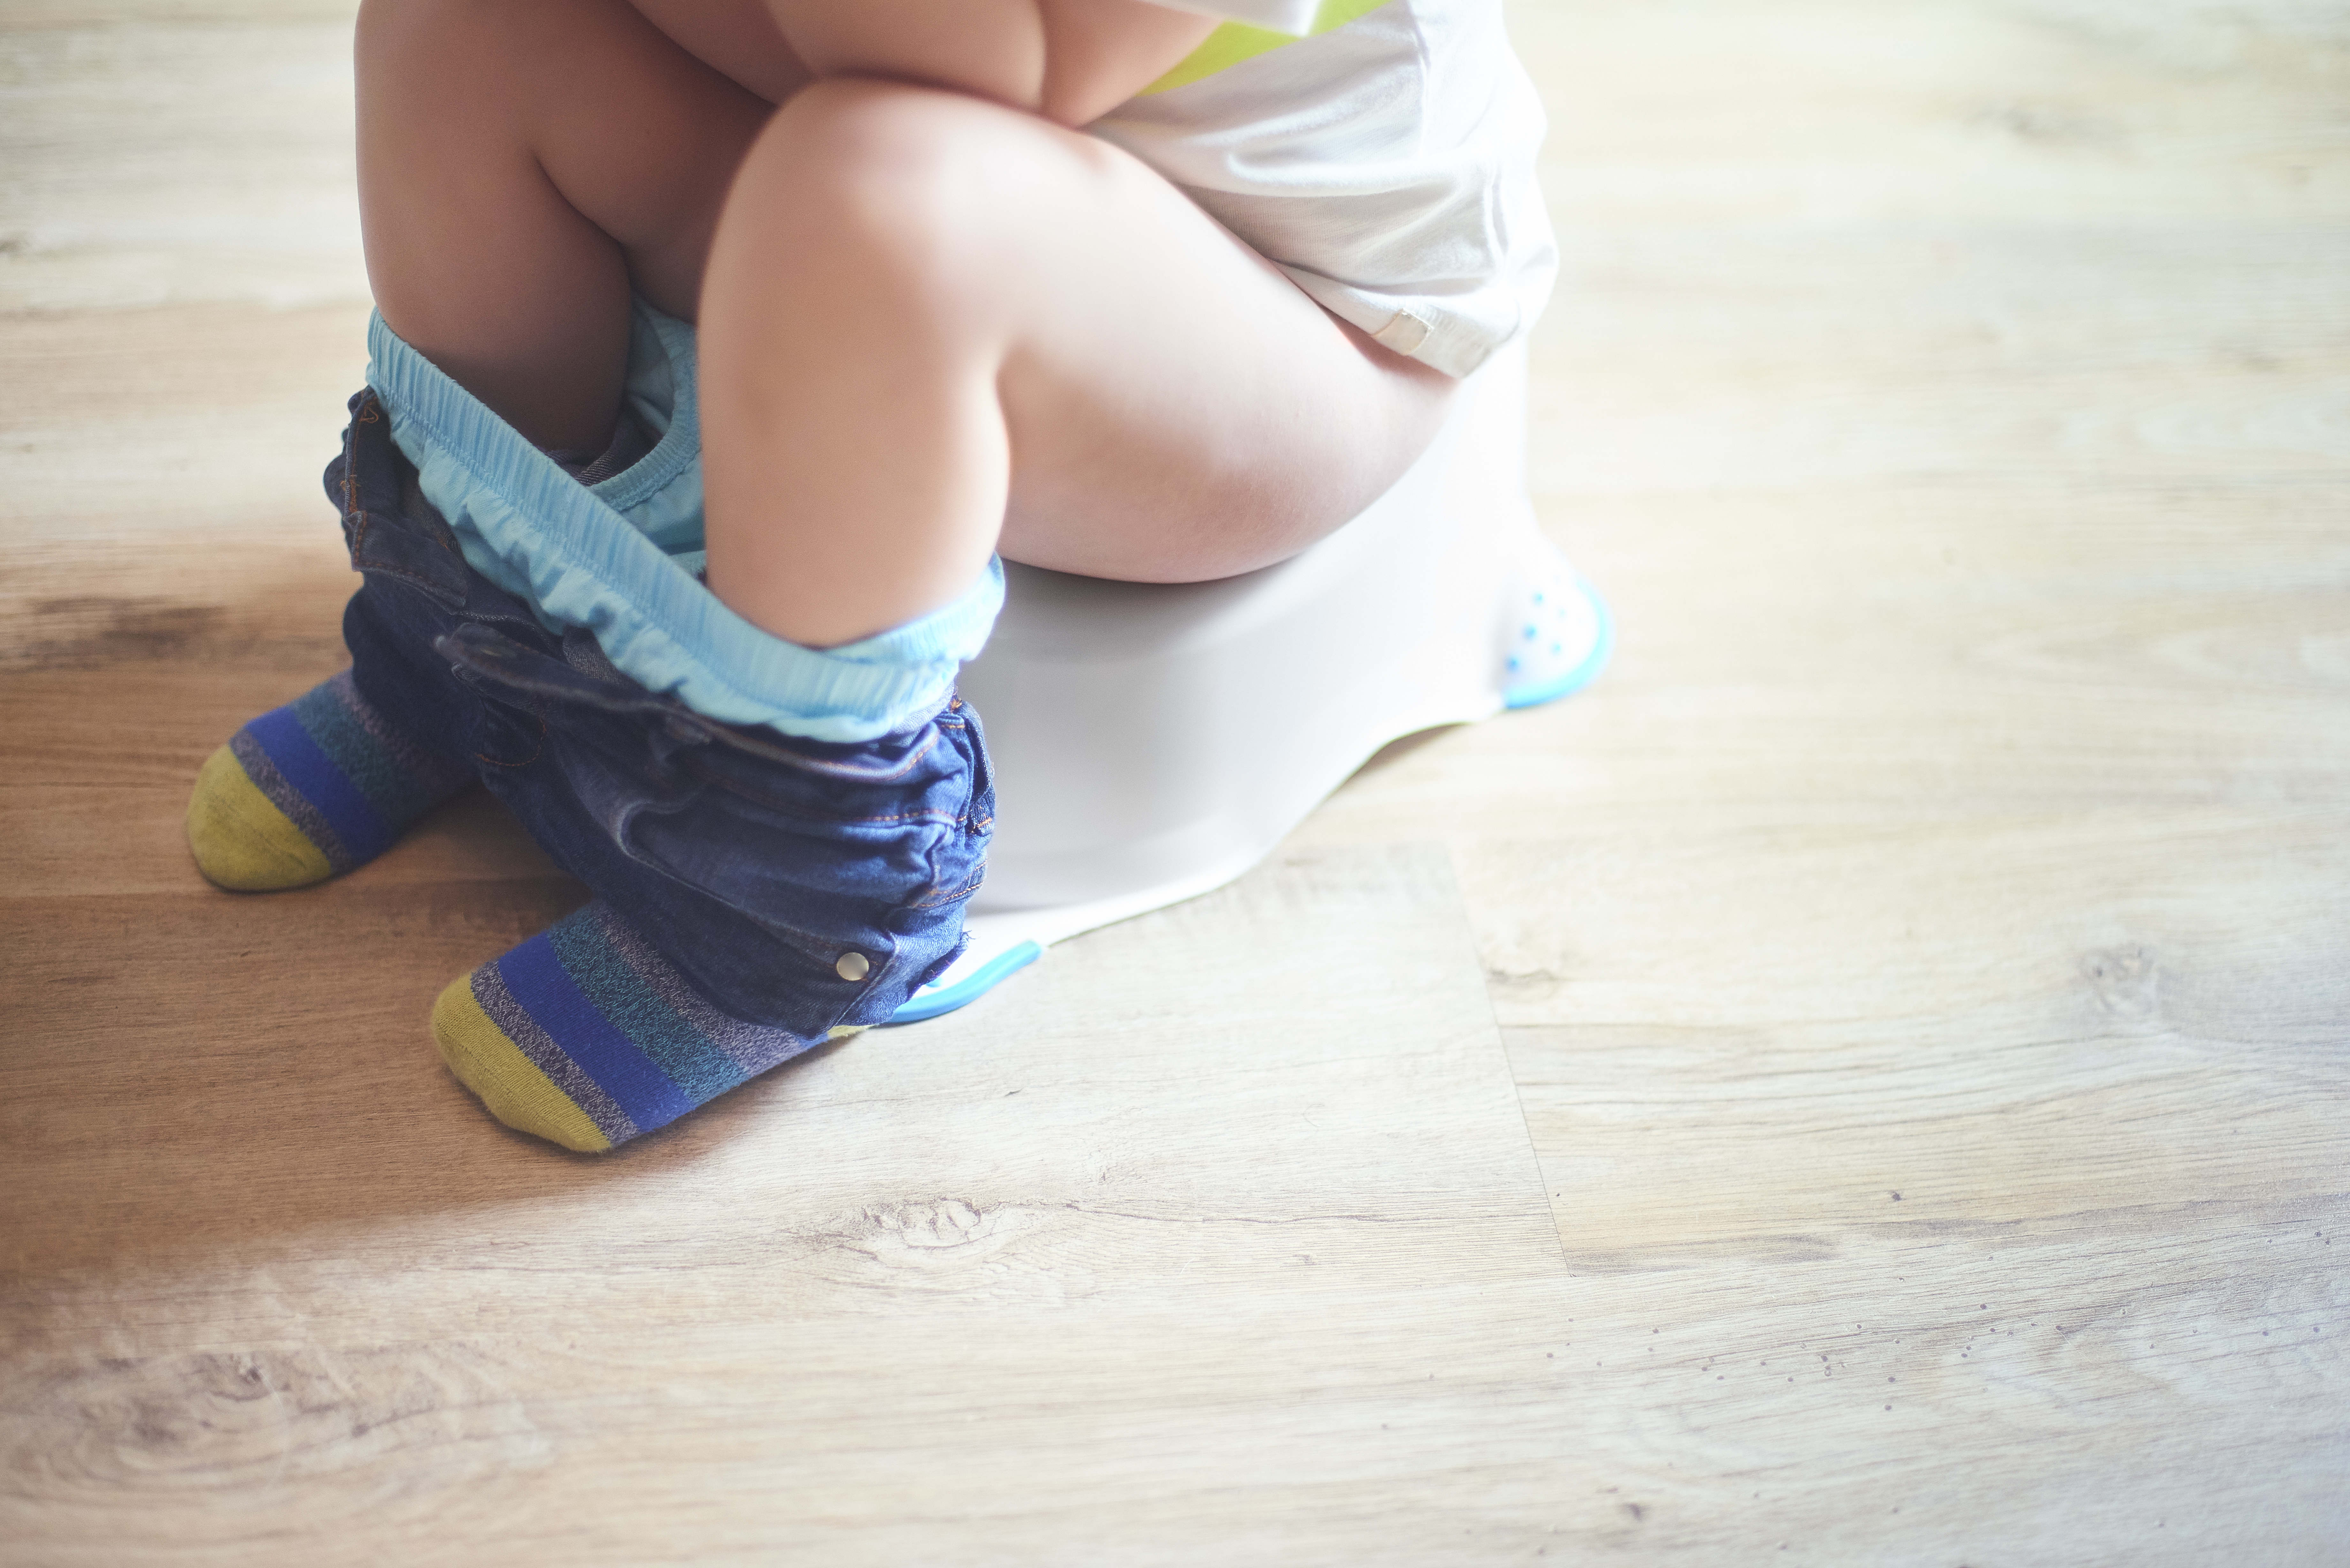 Toilet training regression: What it is and what can you do to help solve it